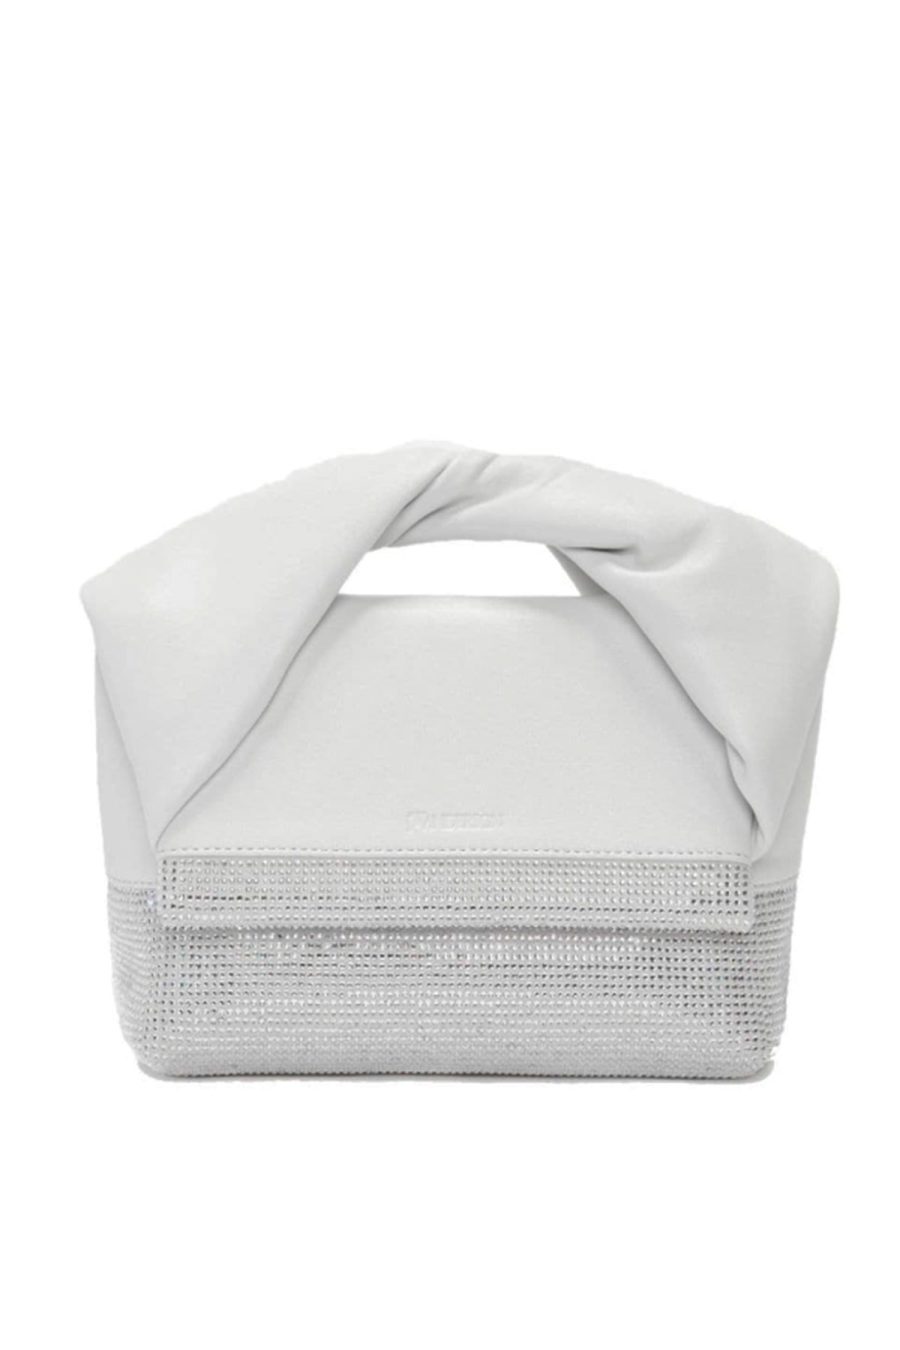 JW ANDERSON Bags.. White